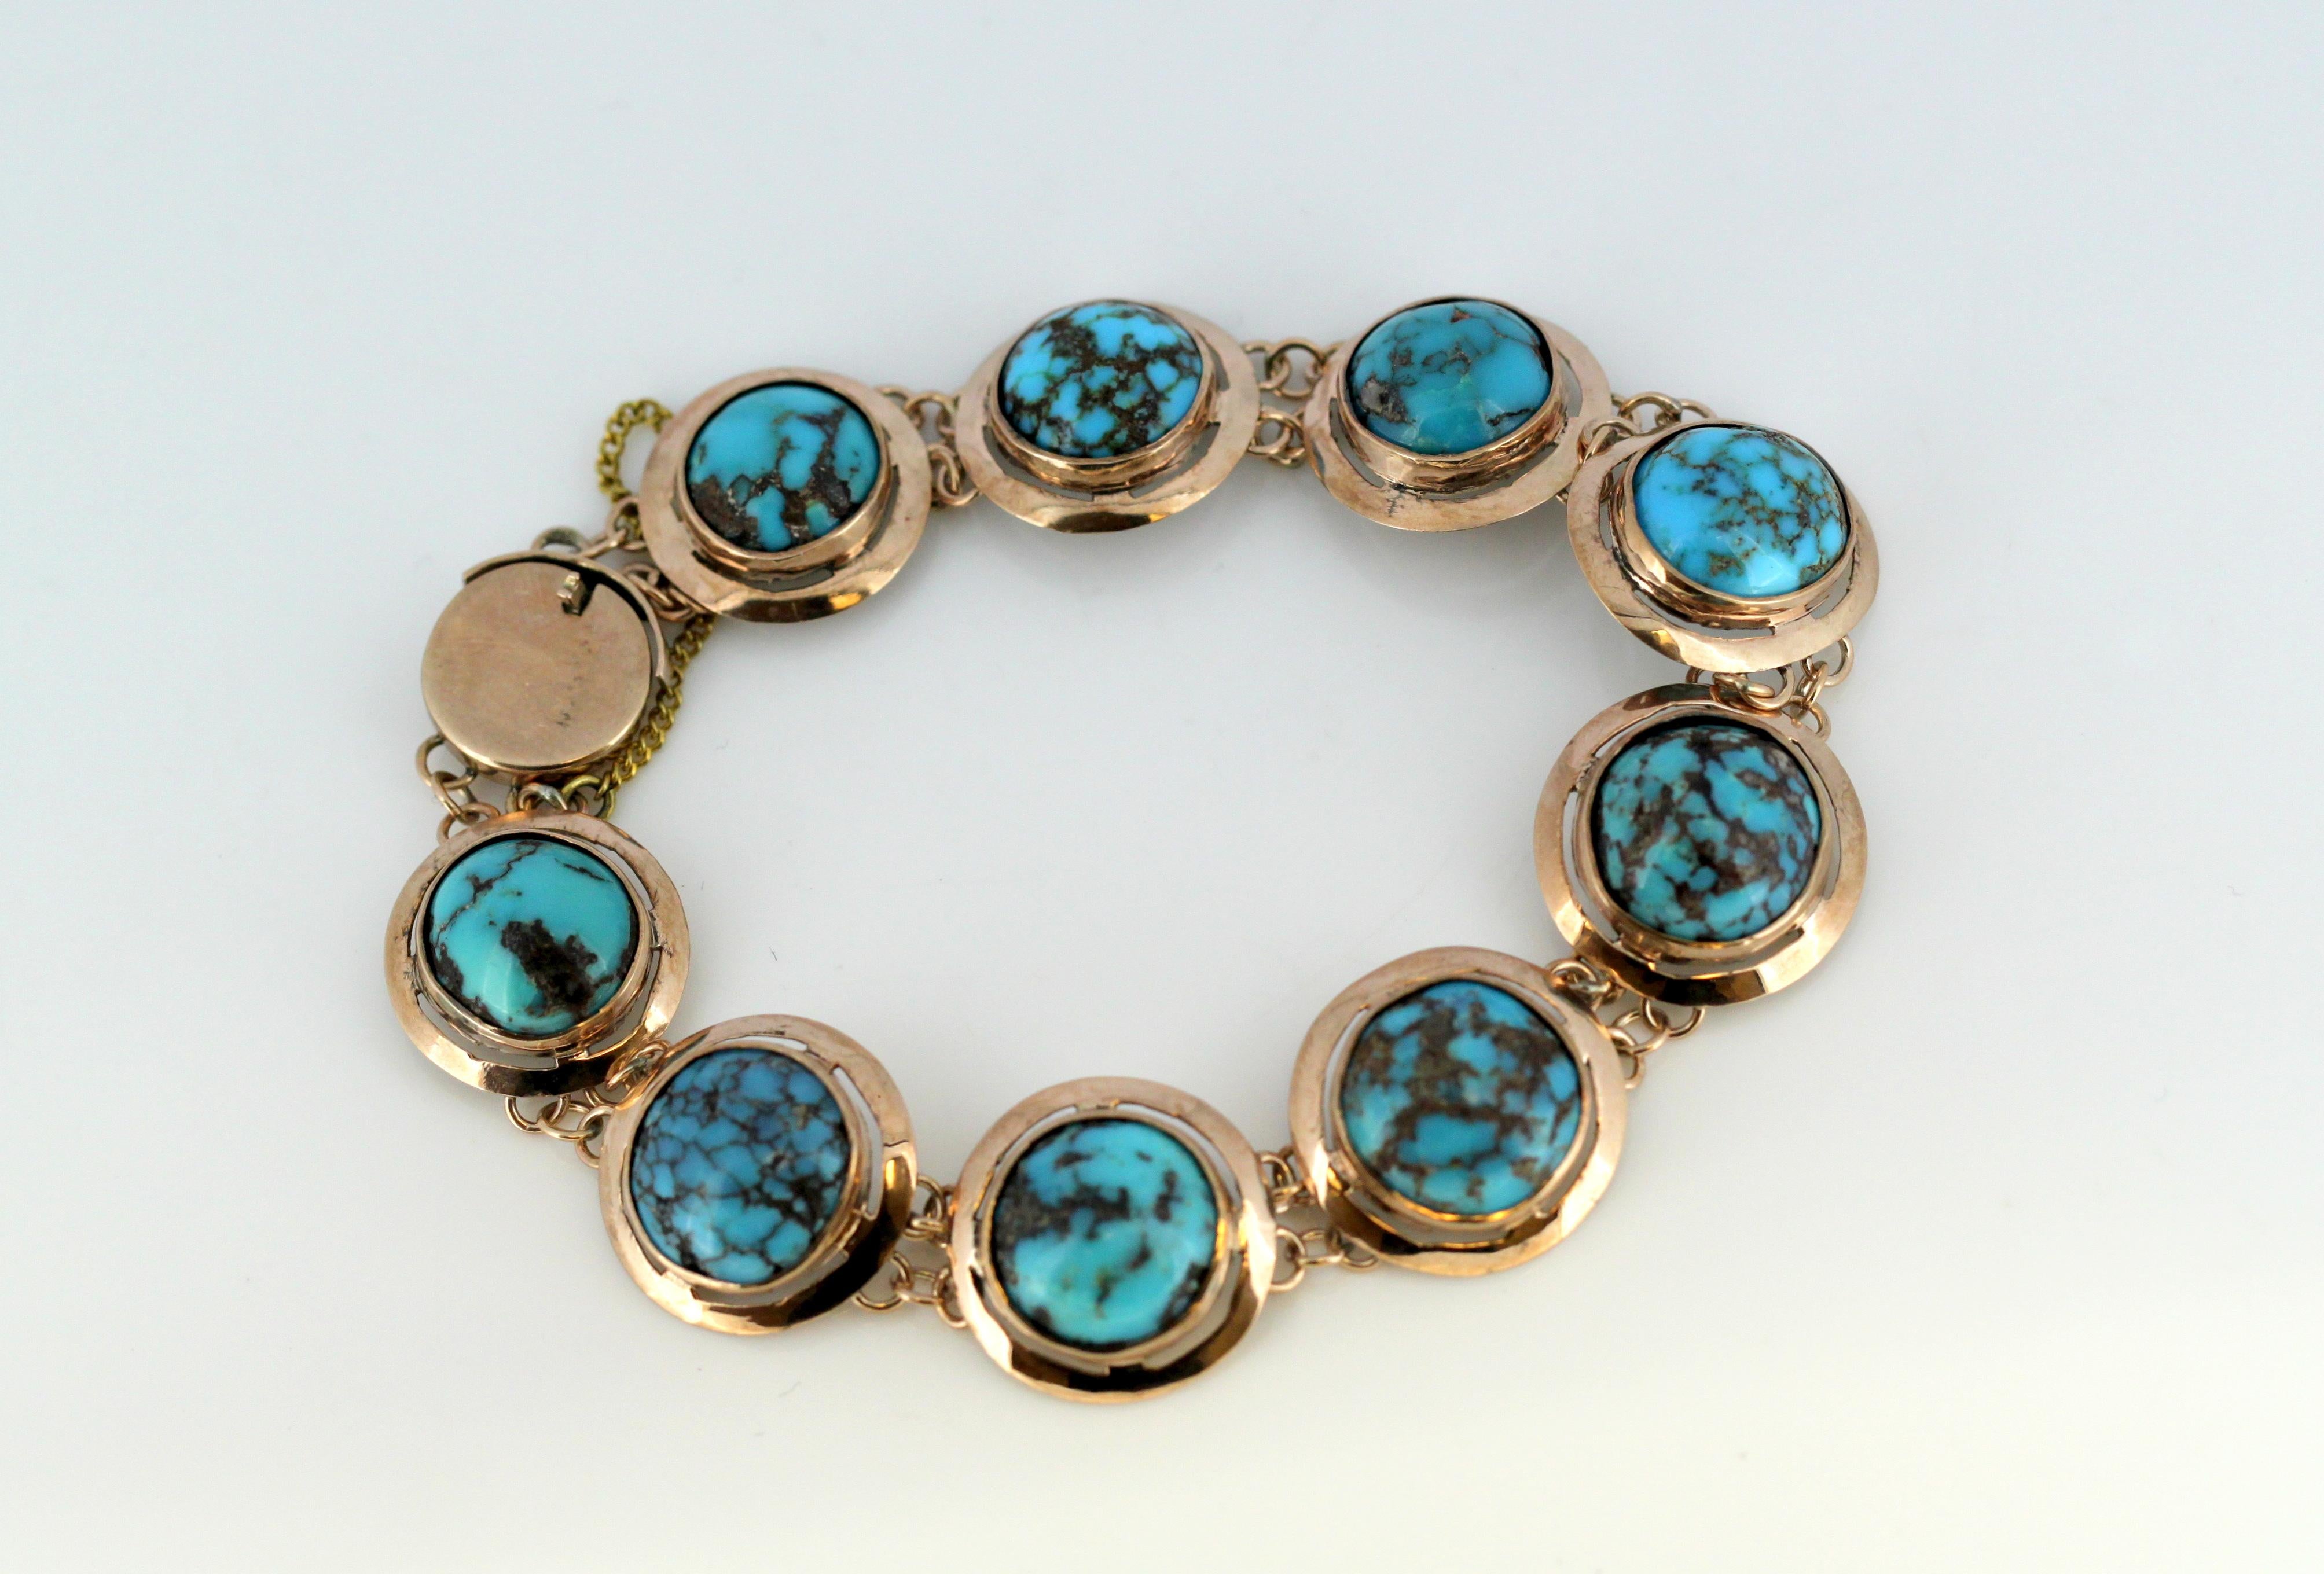 Antique Victorian 15k rose gold ladies bracelet with natural turquoise beads. 
Made in England Circa 1880. 

Approx Dimensions - 
Length x Width x Depth : 19 x 1.7 x 0.6 cm 
Weight : 17 grams 

Turquoise - 
Approximate Bead Size : 6 CT 
Number of